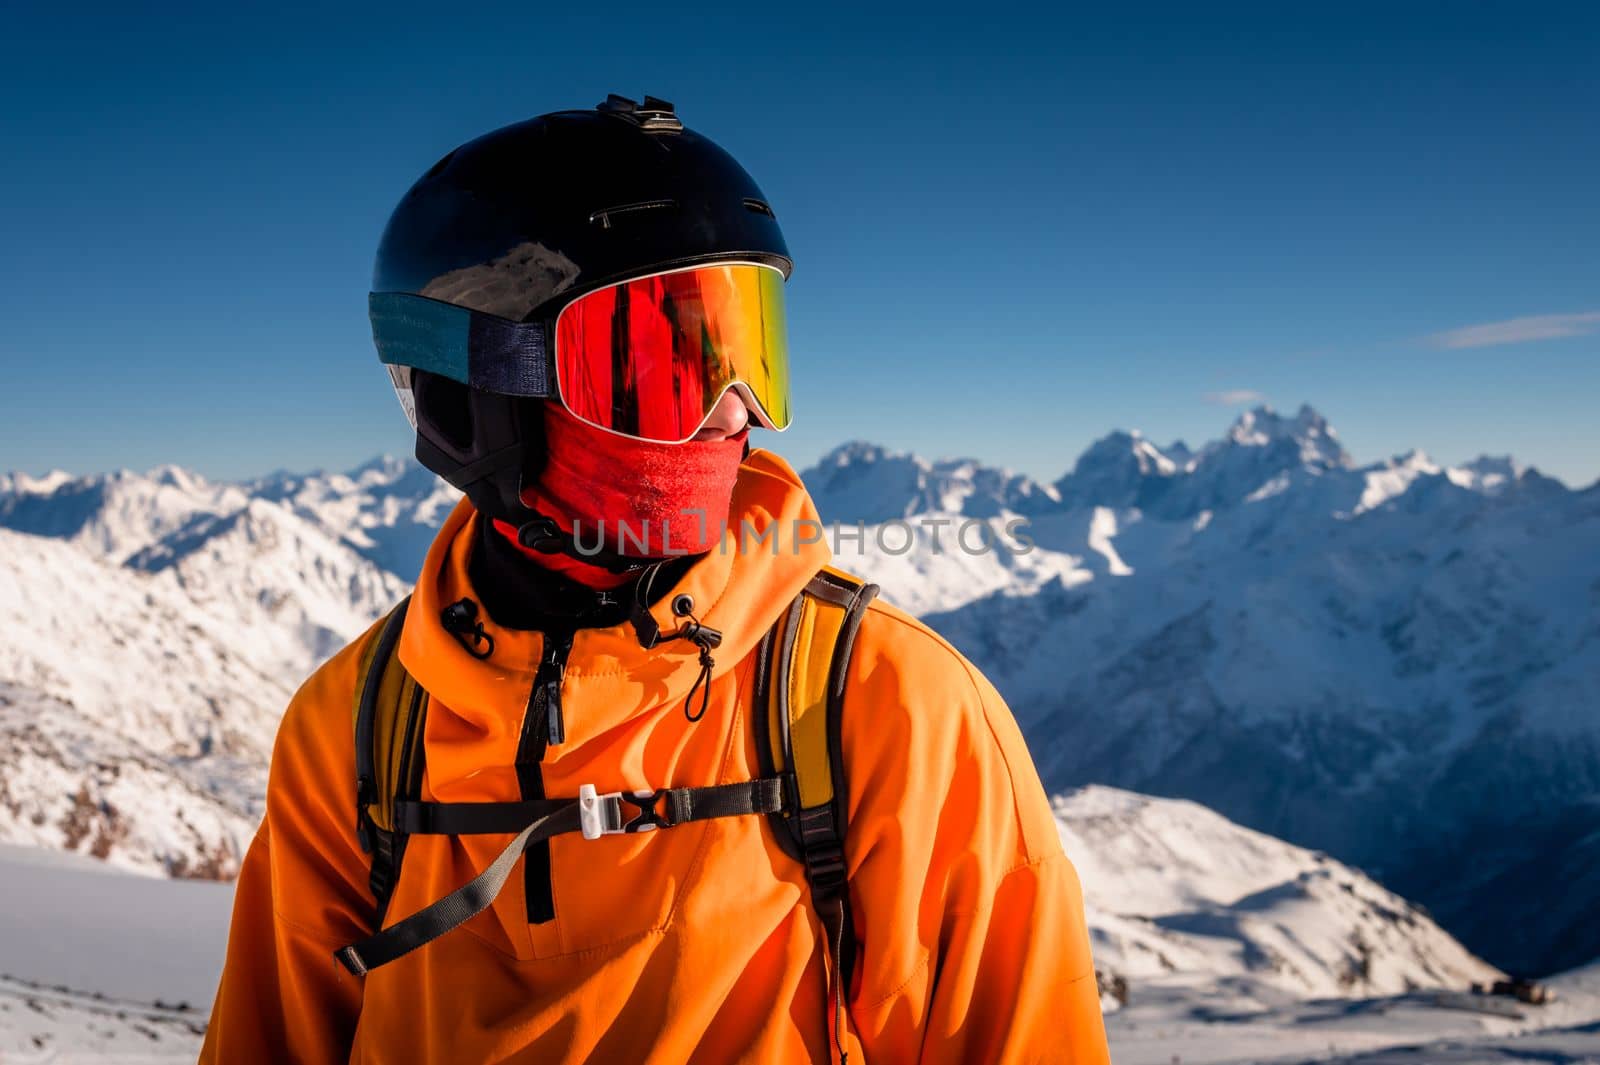 Portrait of a young man in a ski mask, stands in a ski resort against the backdrop of mountains and blue sky.